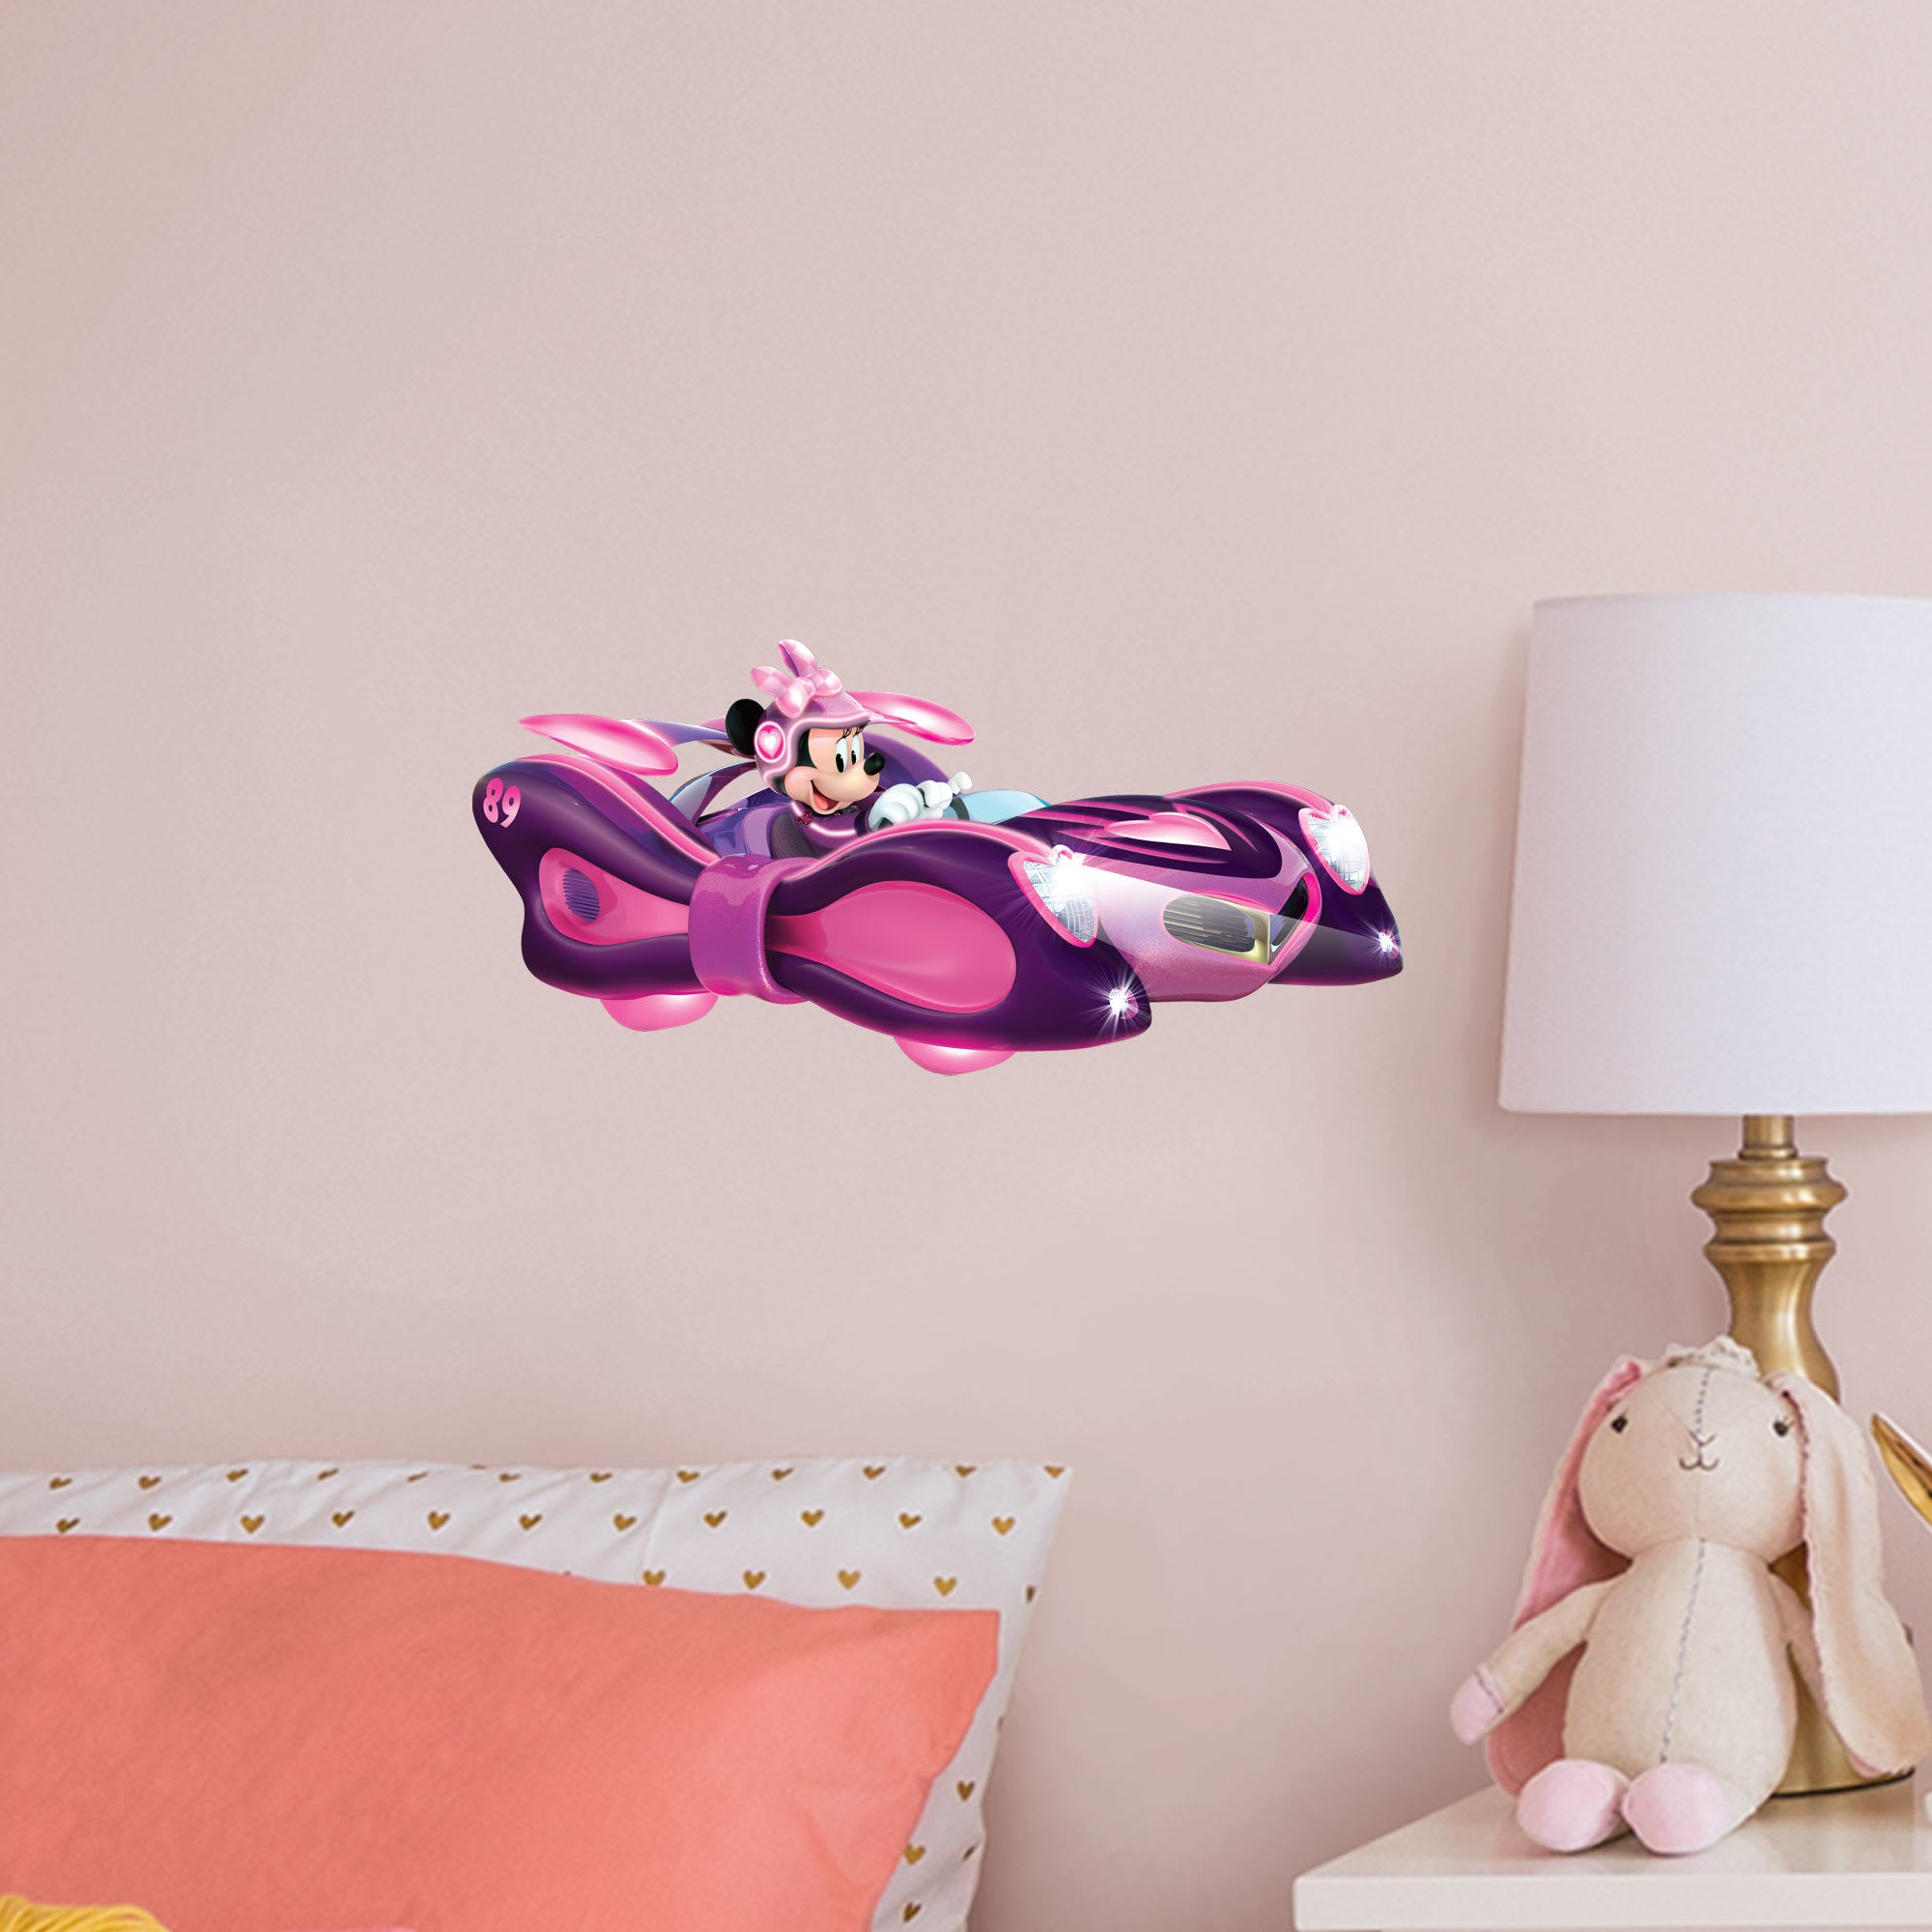 Mickey and the Roadster Racers: Minnie Mouse Racecar - Officially Licensed Disney Removable Wall Decal Large by Fathead | Vinyl